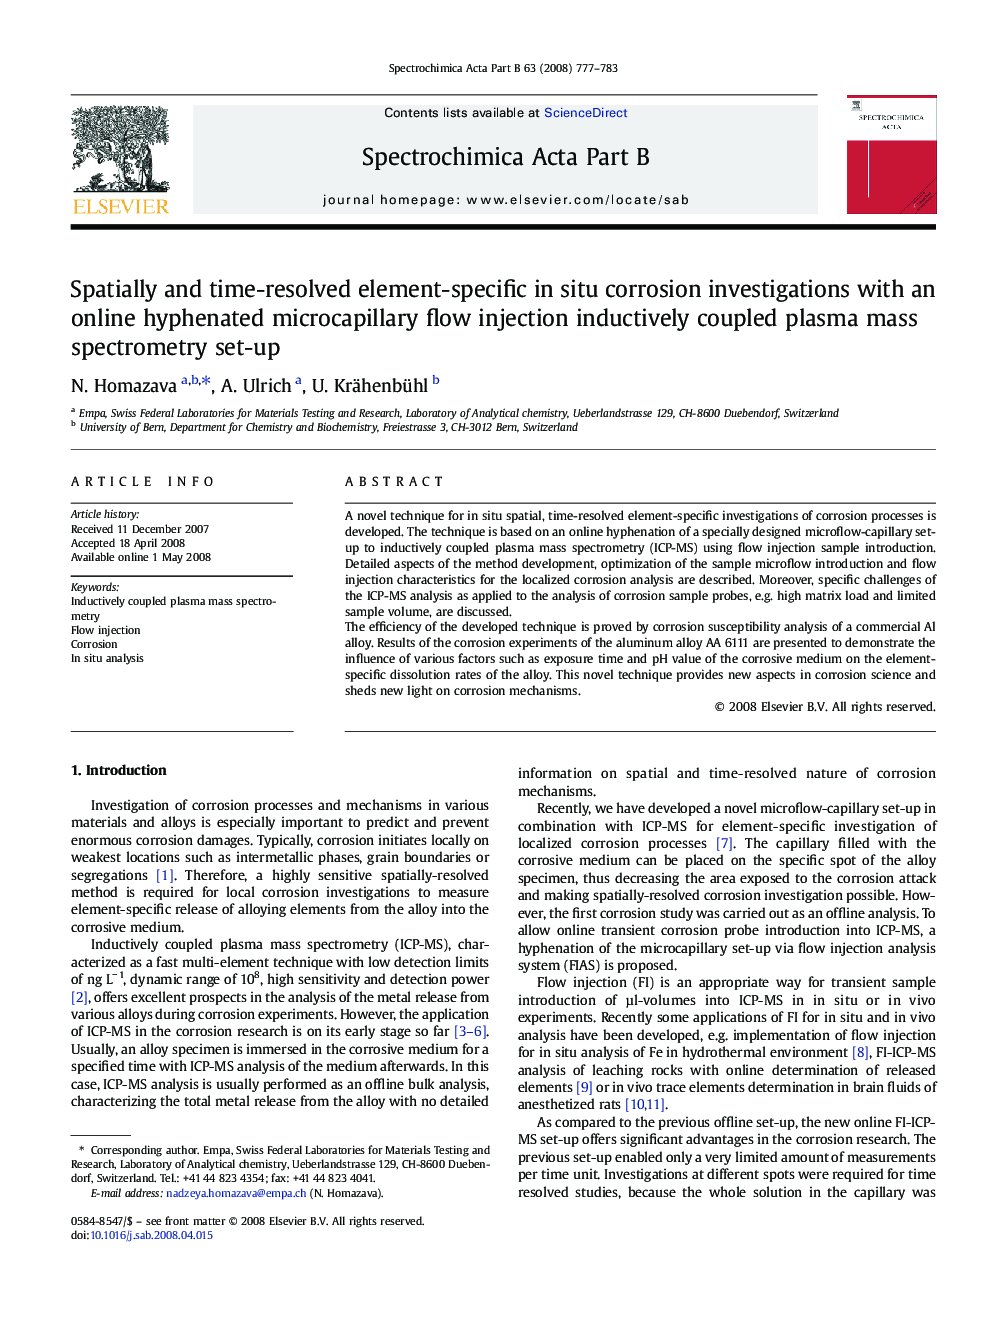 Spatially and time-resolved element-specific in situ corrosion investigations with an online hyphenated microcapillary flow injection inductively coupled plasma mass spectrometry set-up